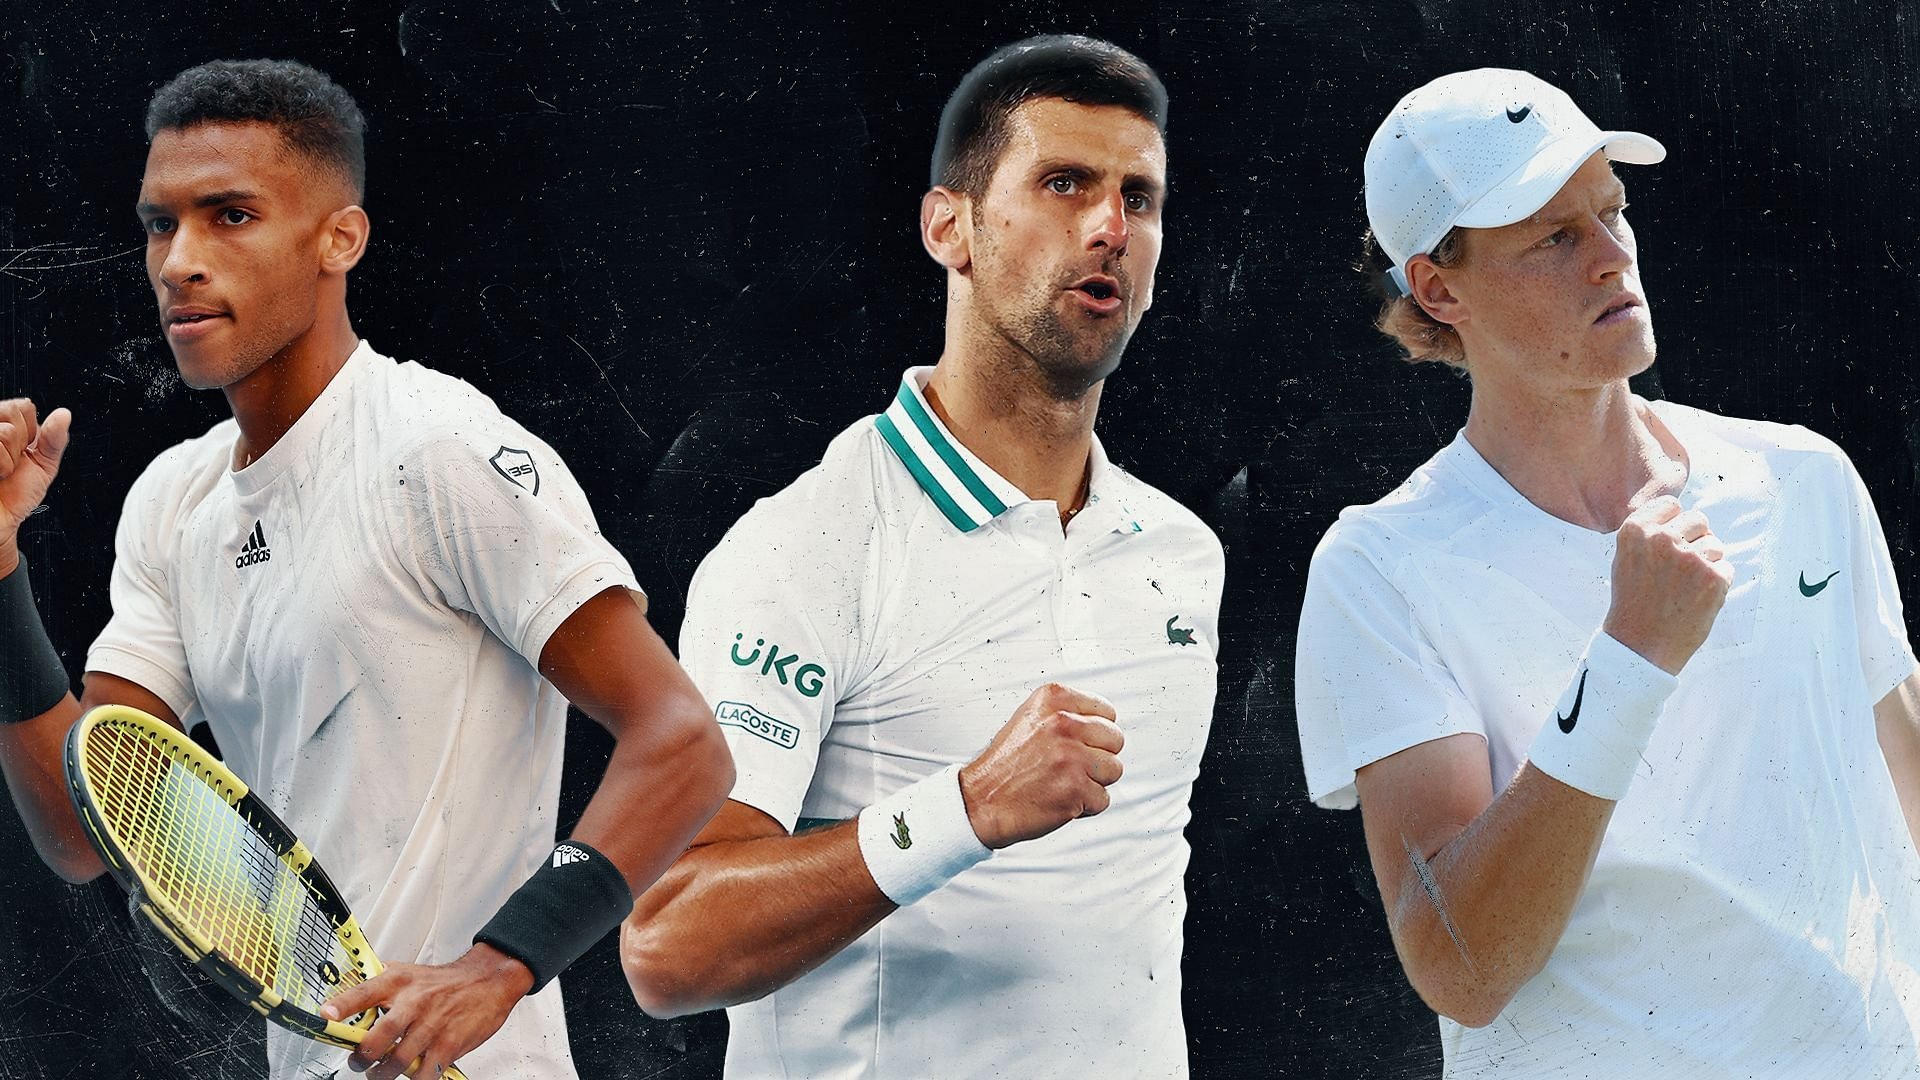 Davis Cup Finals 2023: Complete schedule, qualified teams, format and more